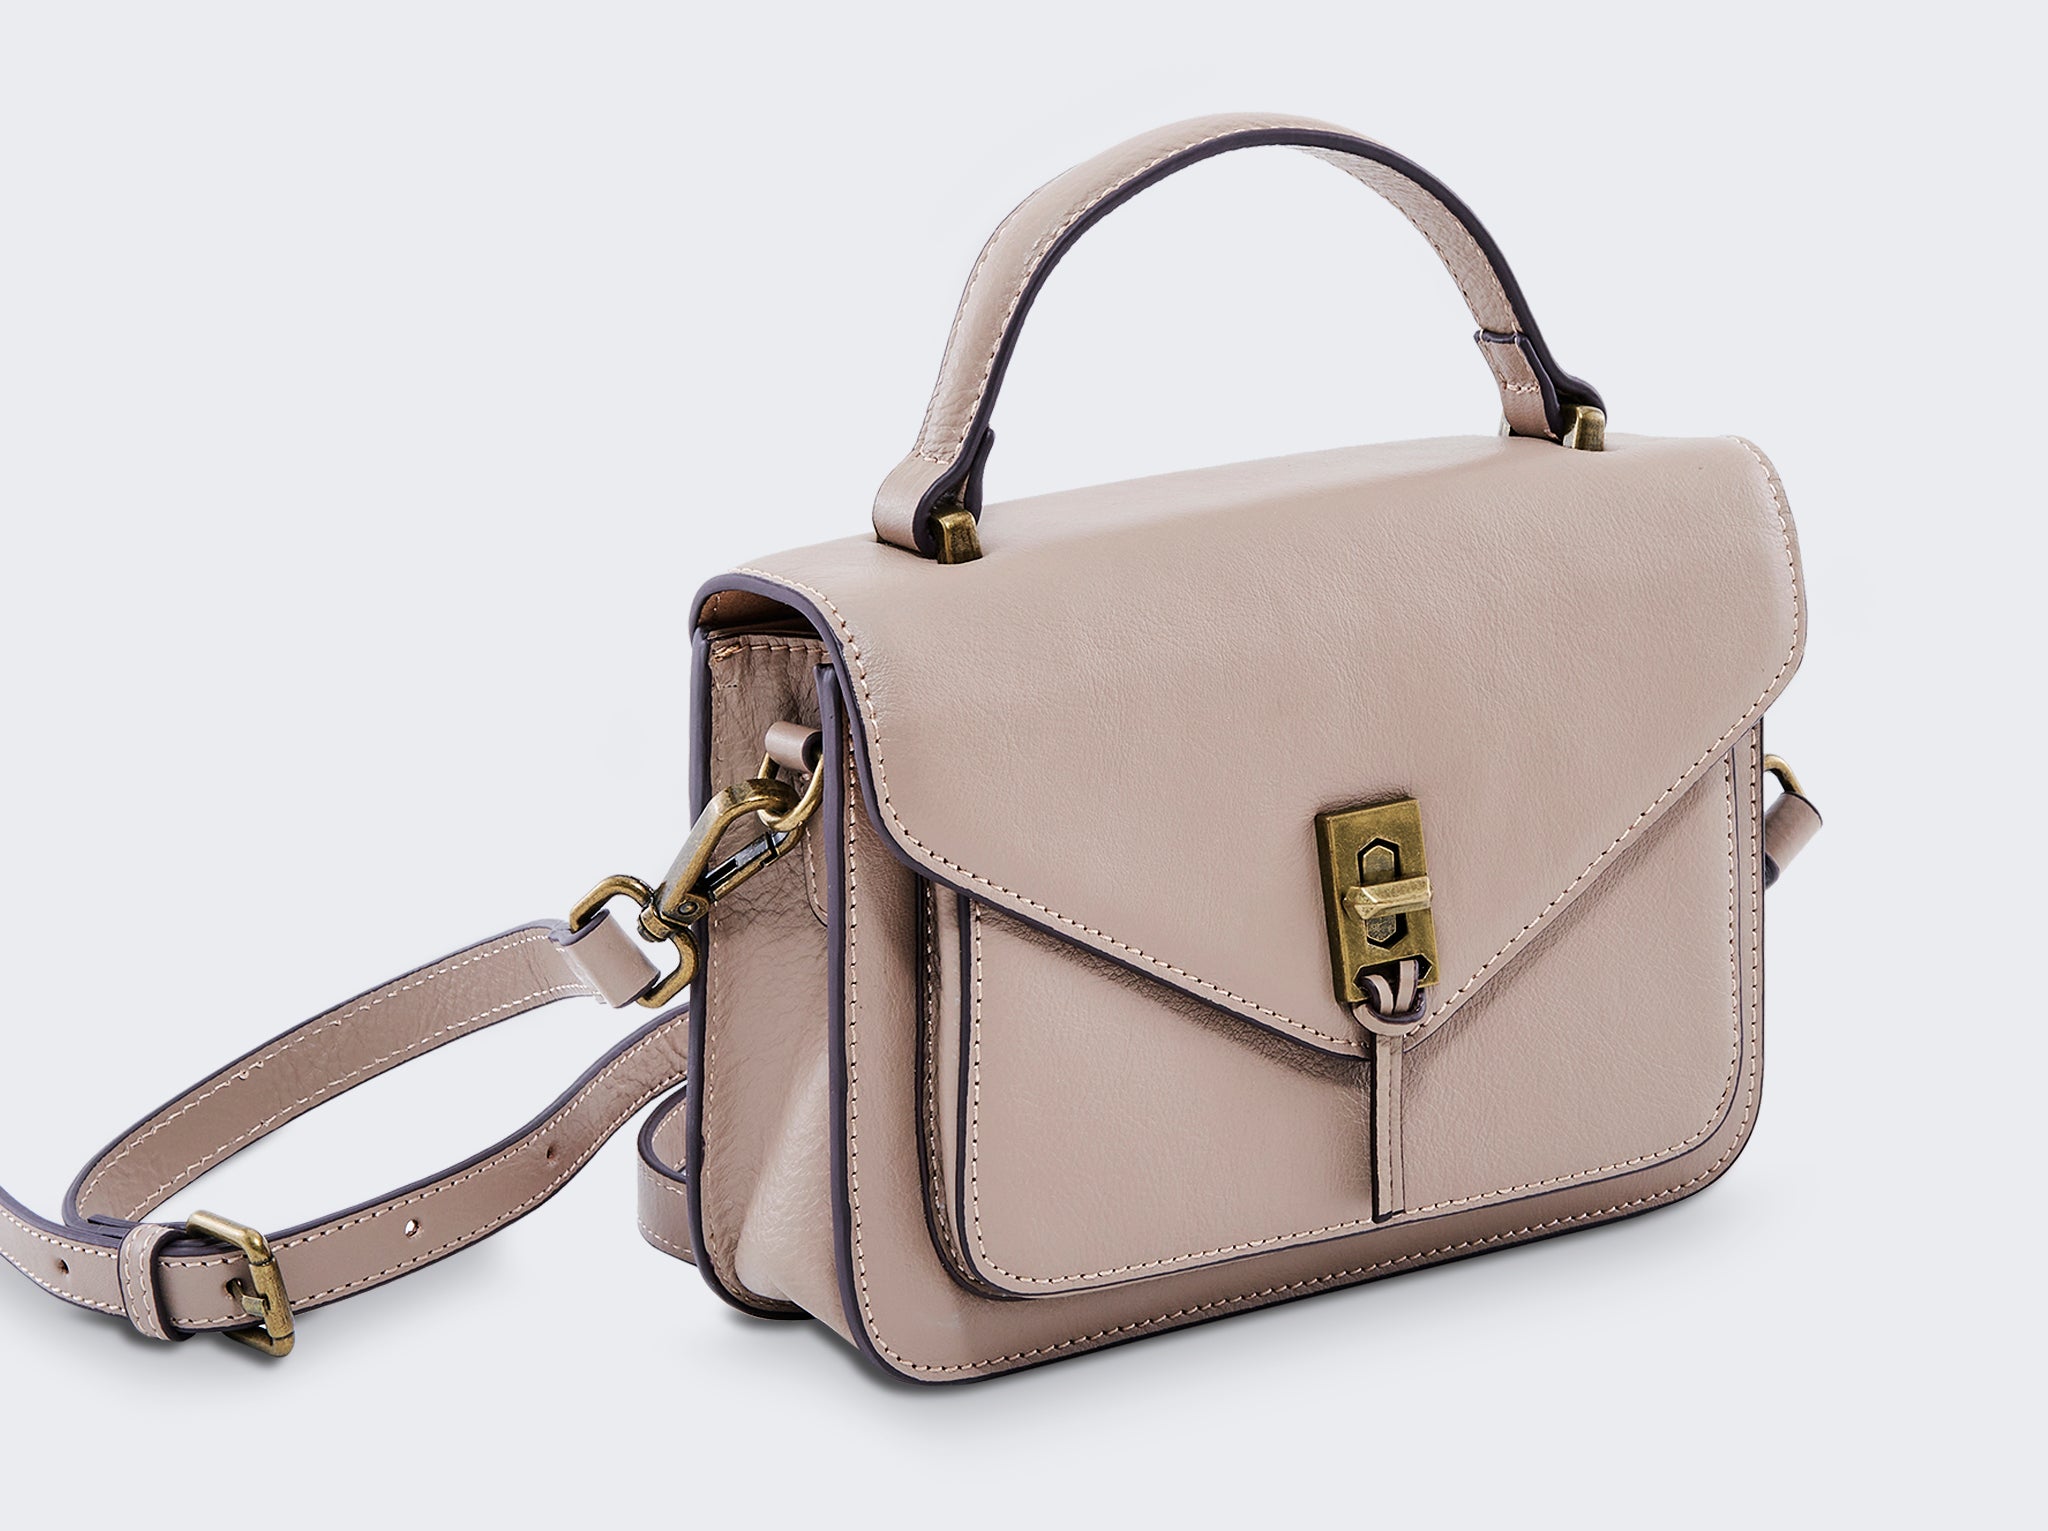 The Neuilly Shoulder Bag in Beige Sable